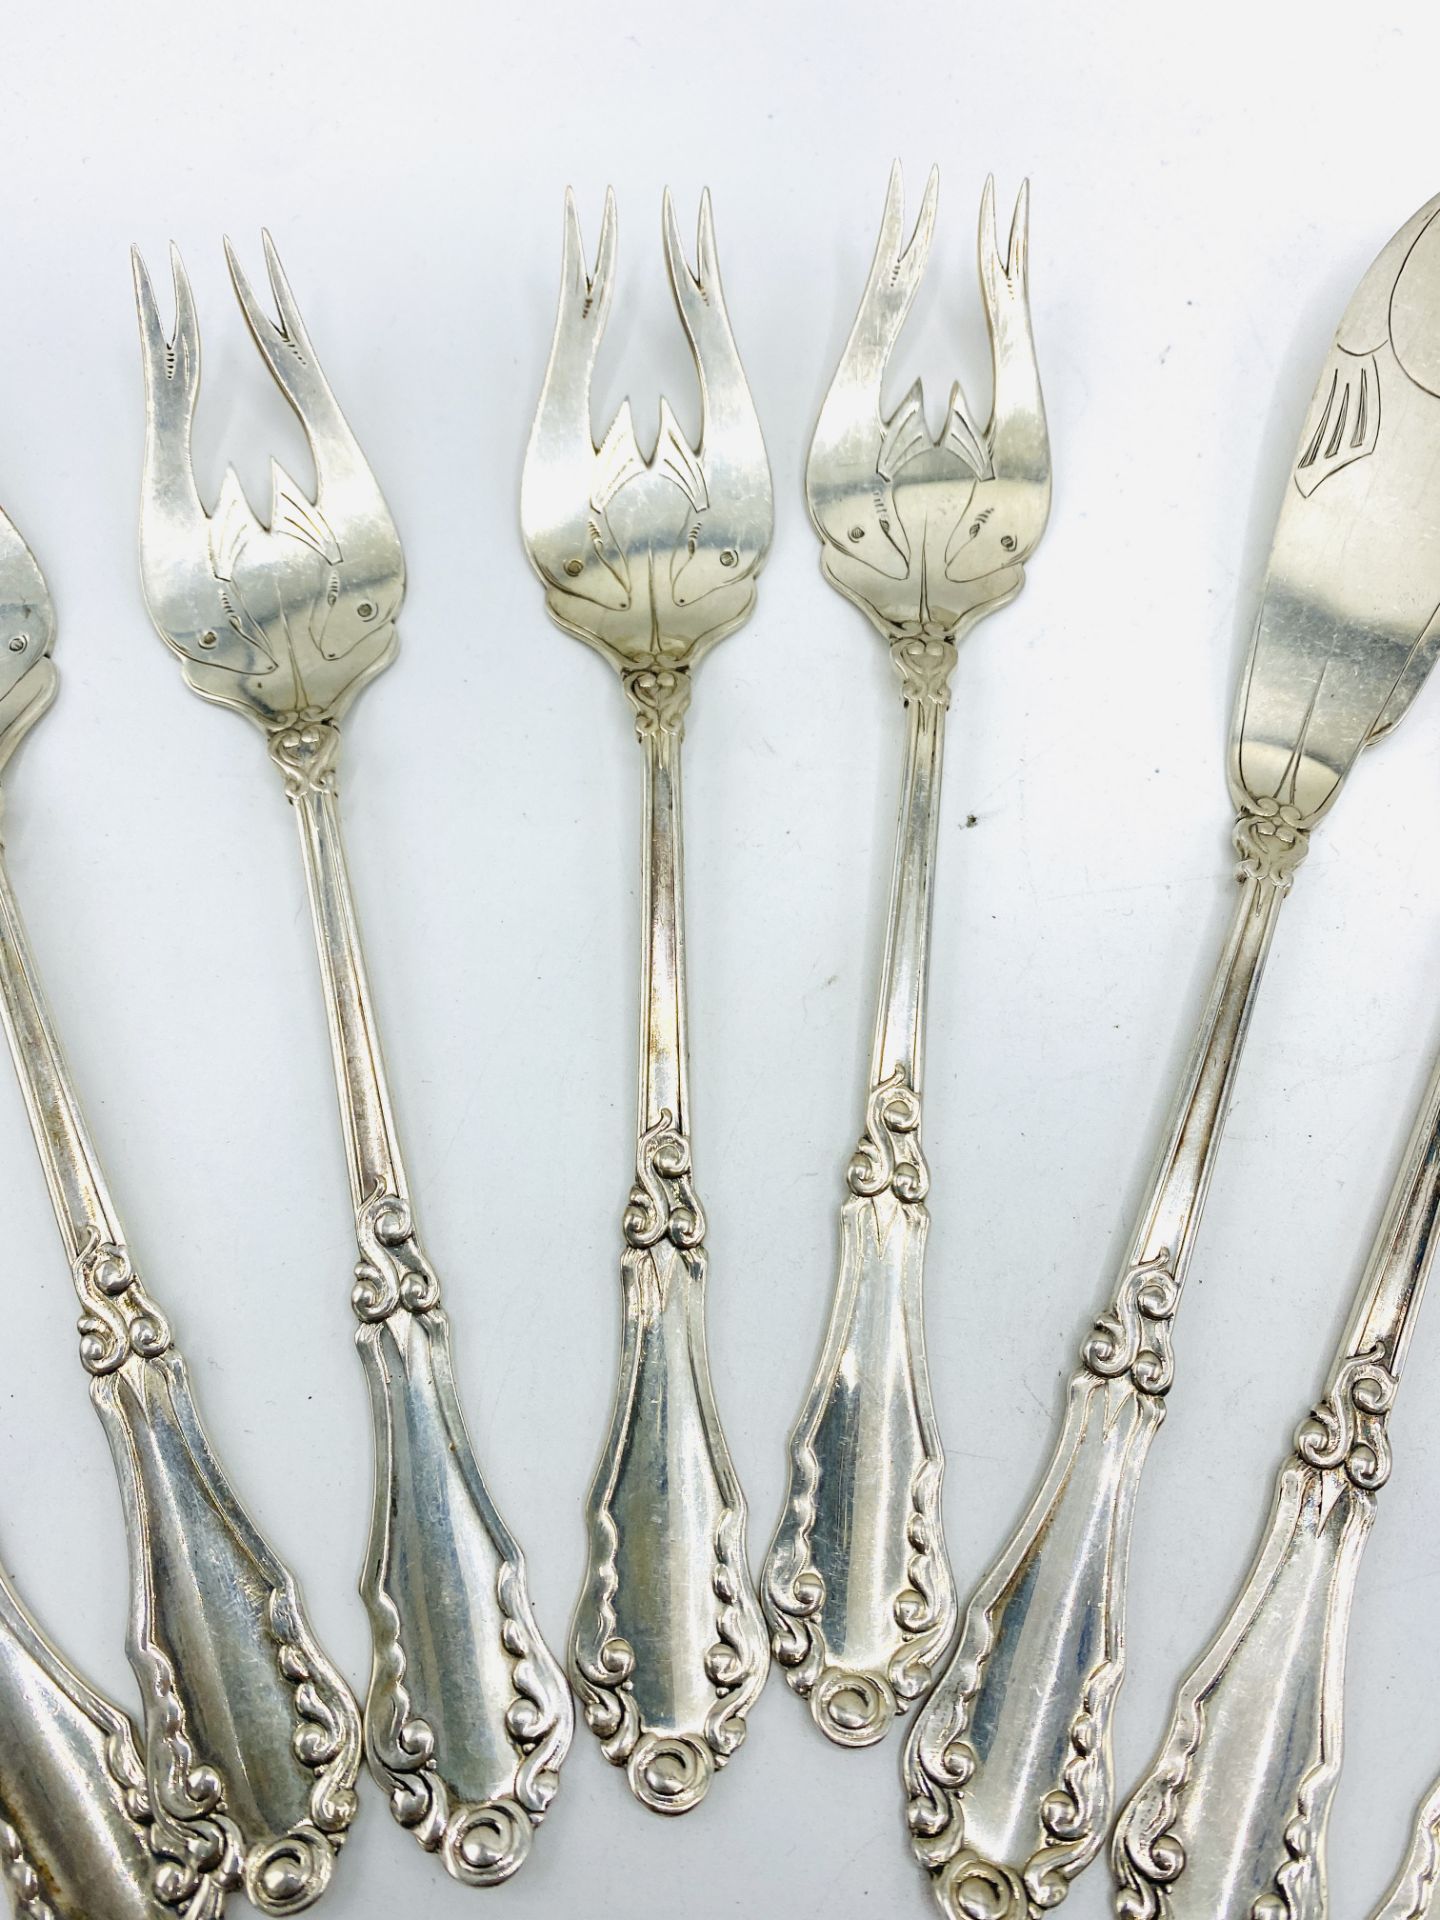 8 piece silver fish cutlery setting by Peter Hertz Of Denmark - Image 4 of 6